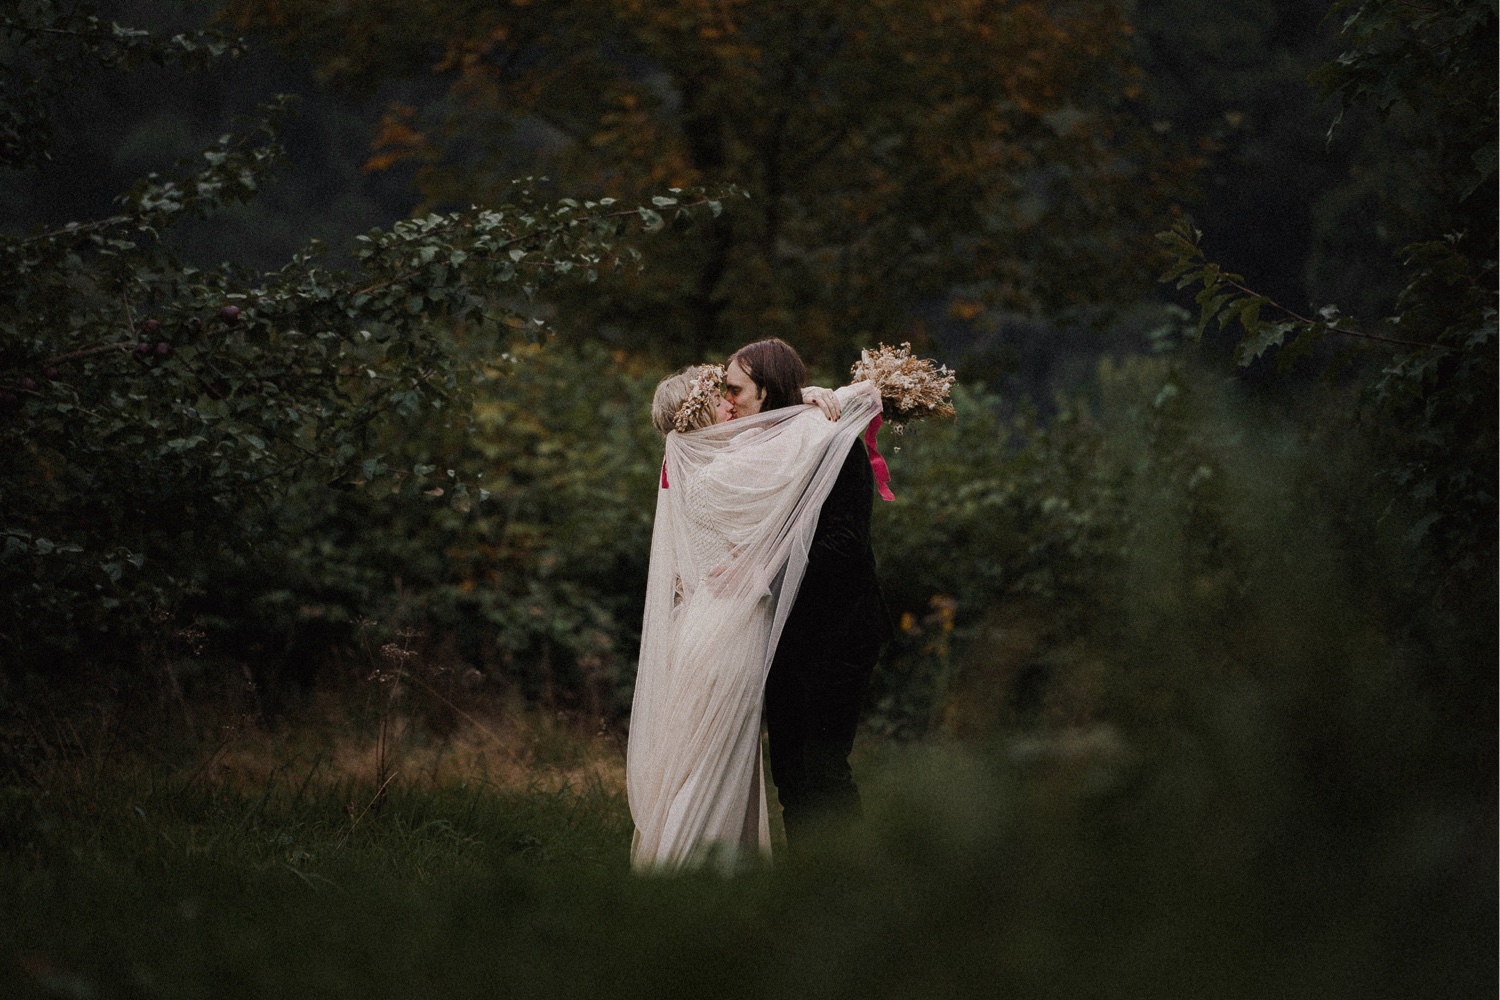 Wedding photographs of a bride and groom hugging in an orchard.